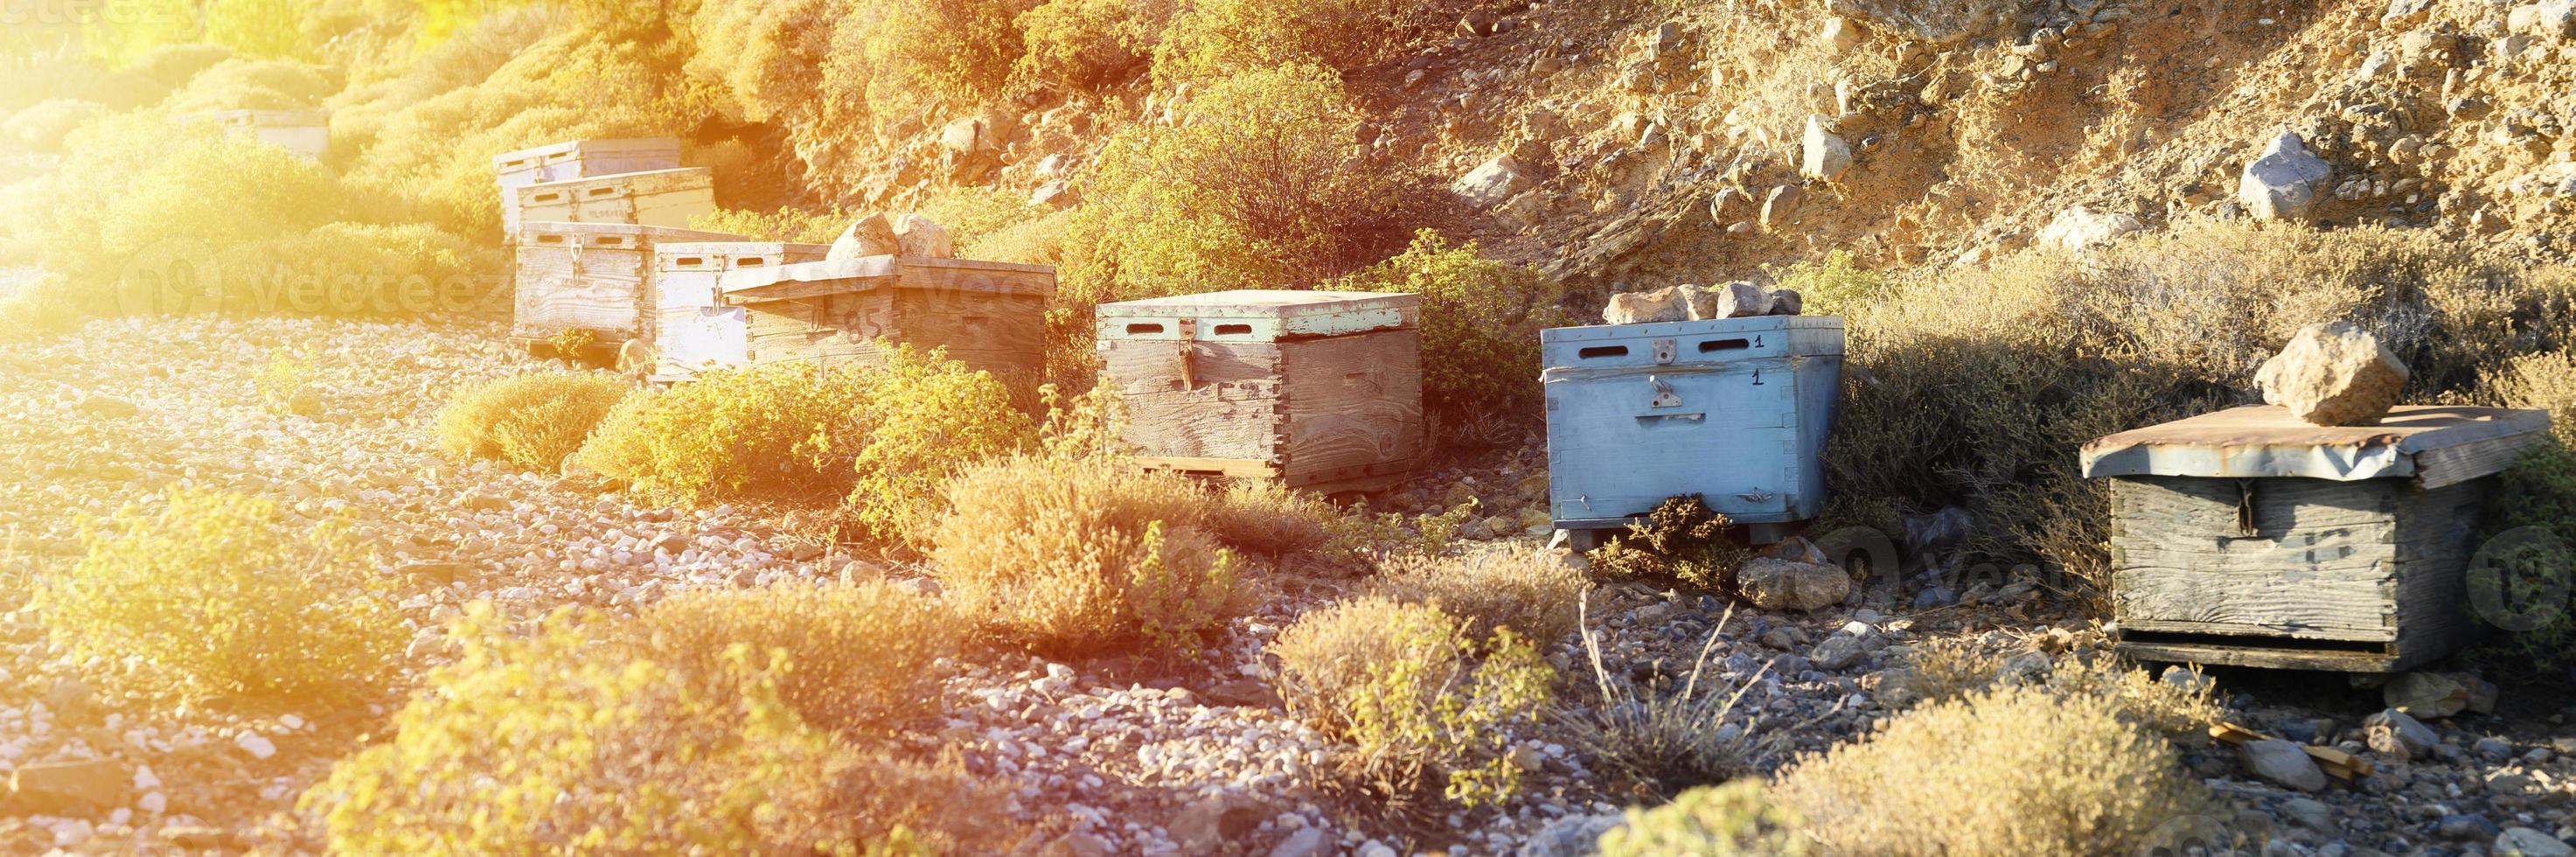 Bee hives in a mountainous area at dusk photo